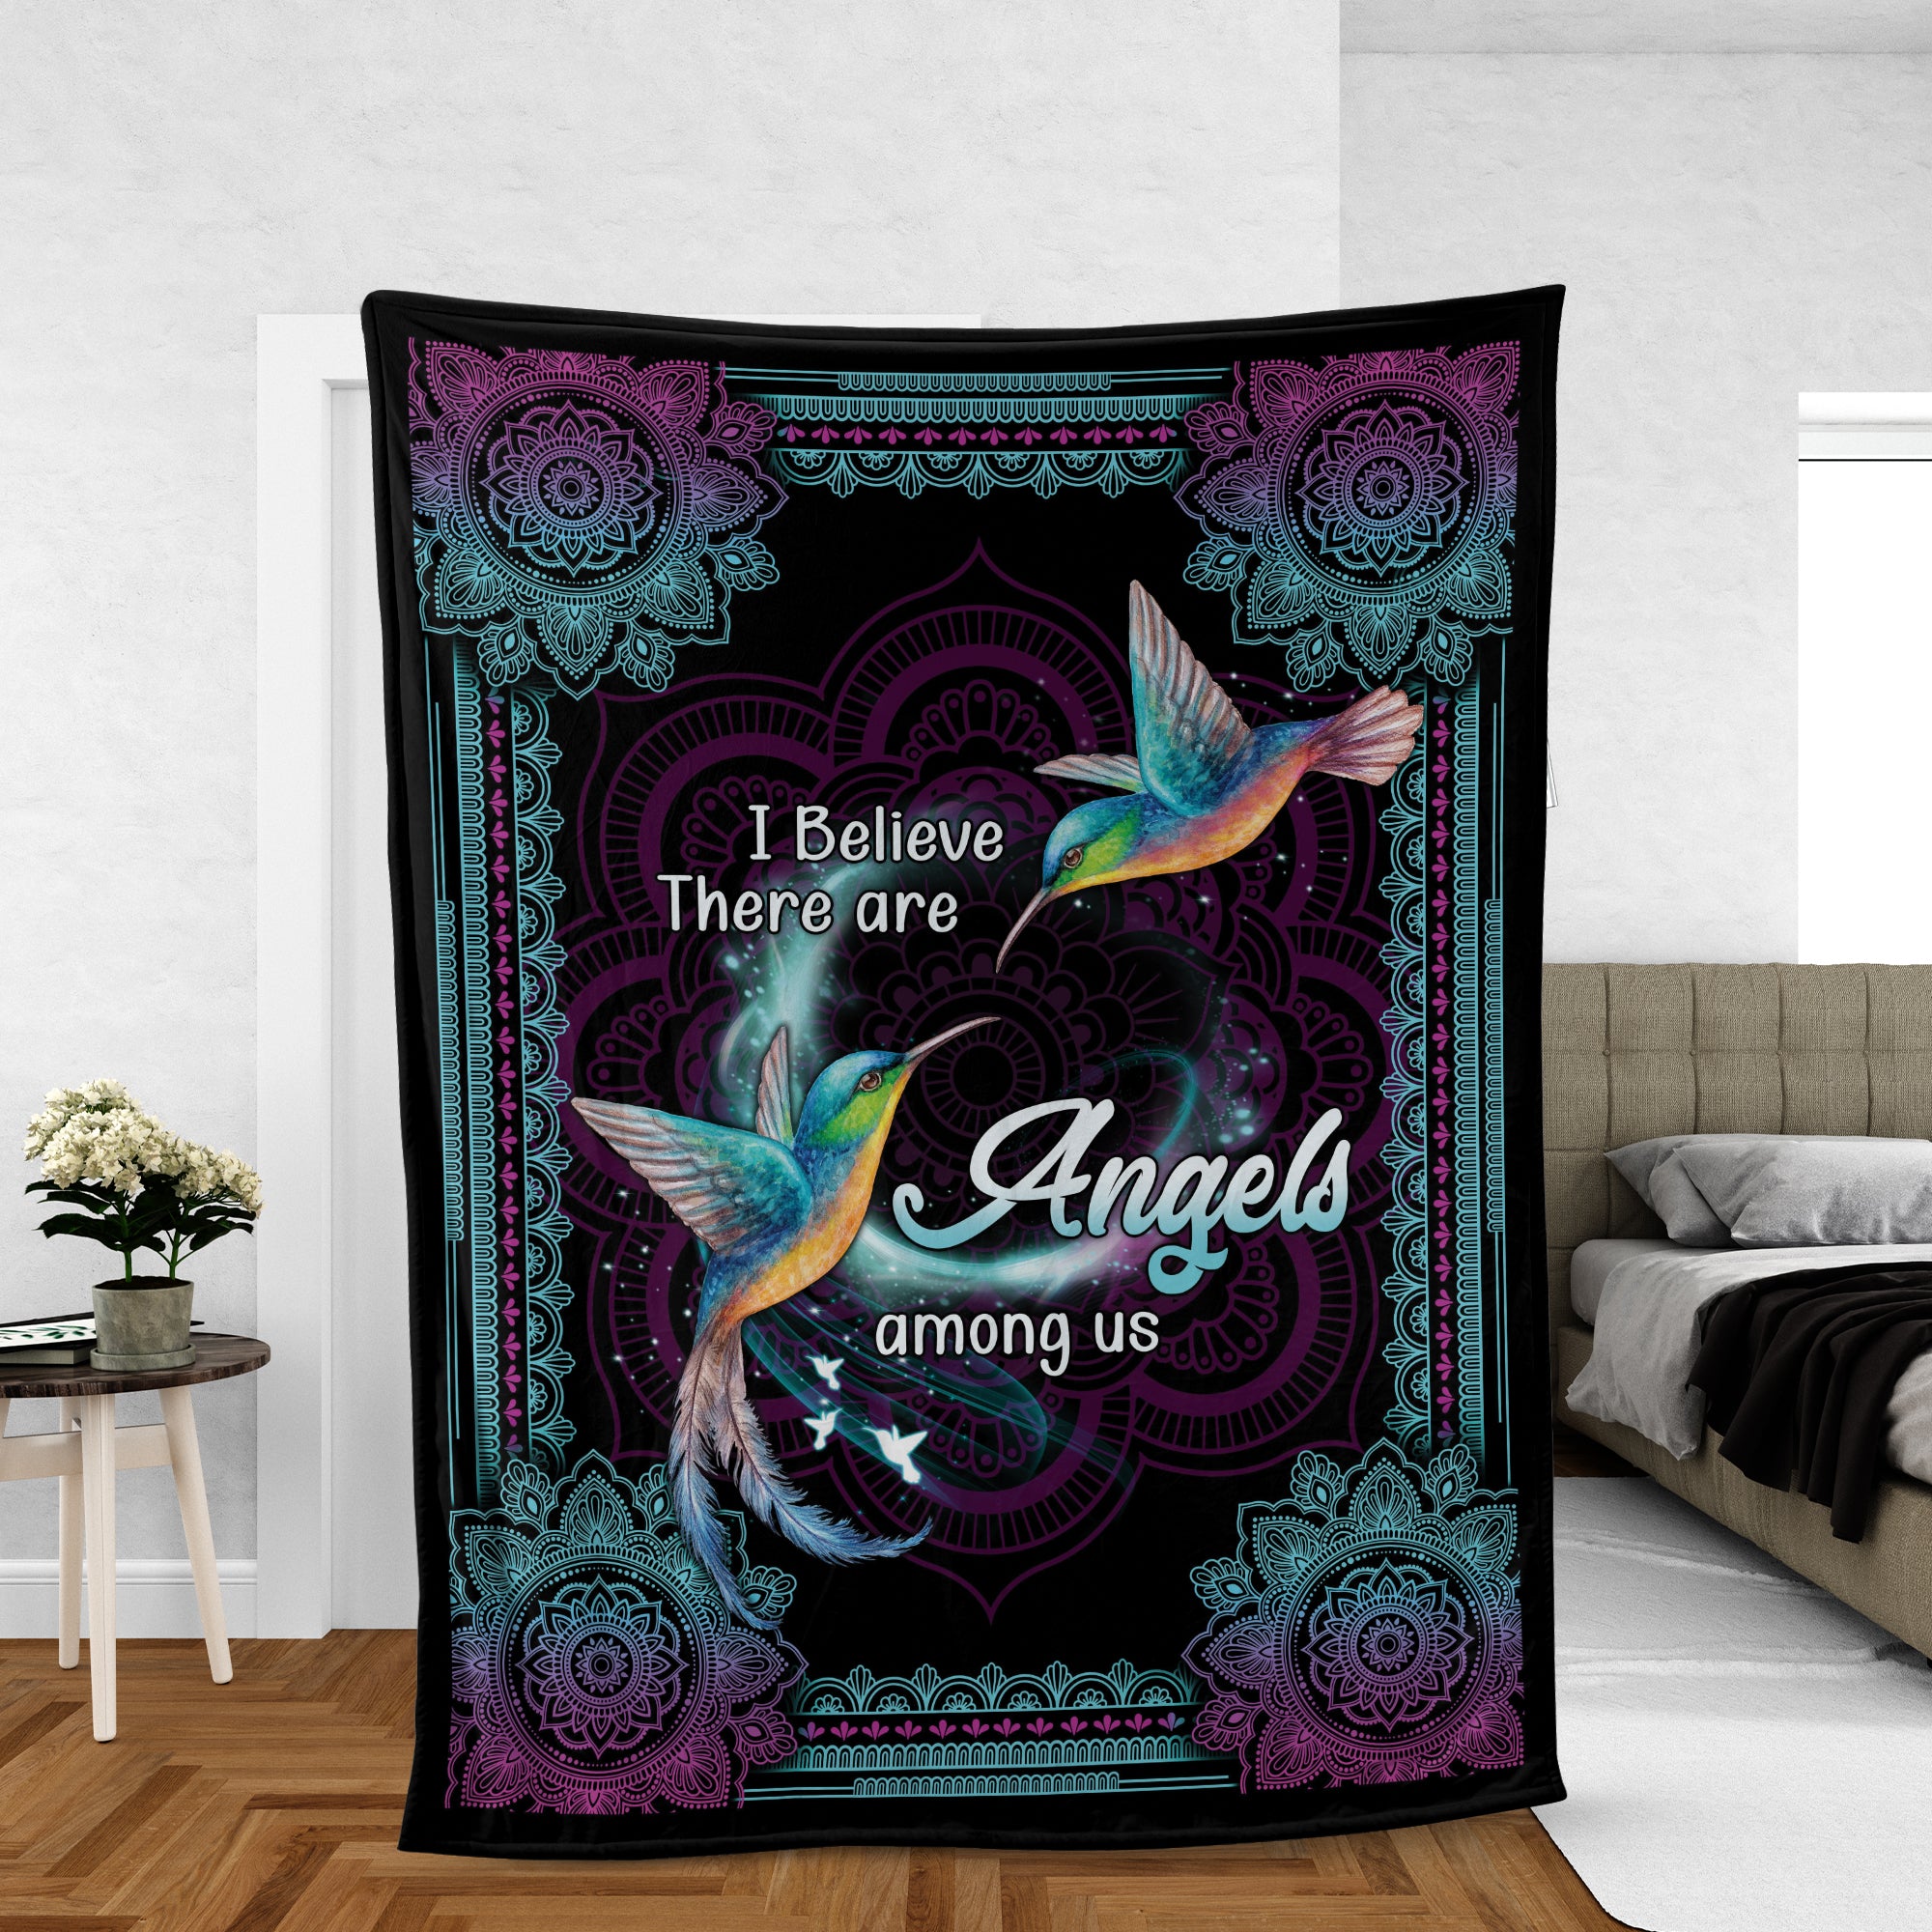 Memorial Blanket, Heaven Blanket, Hummingbird Blanket, Sympathy Gift, Remembrance Gift - I Believe There Are Angels Among Us